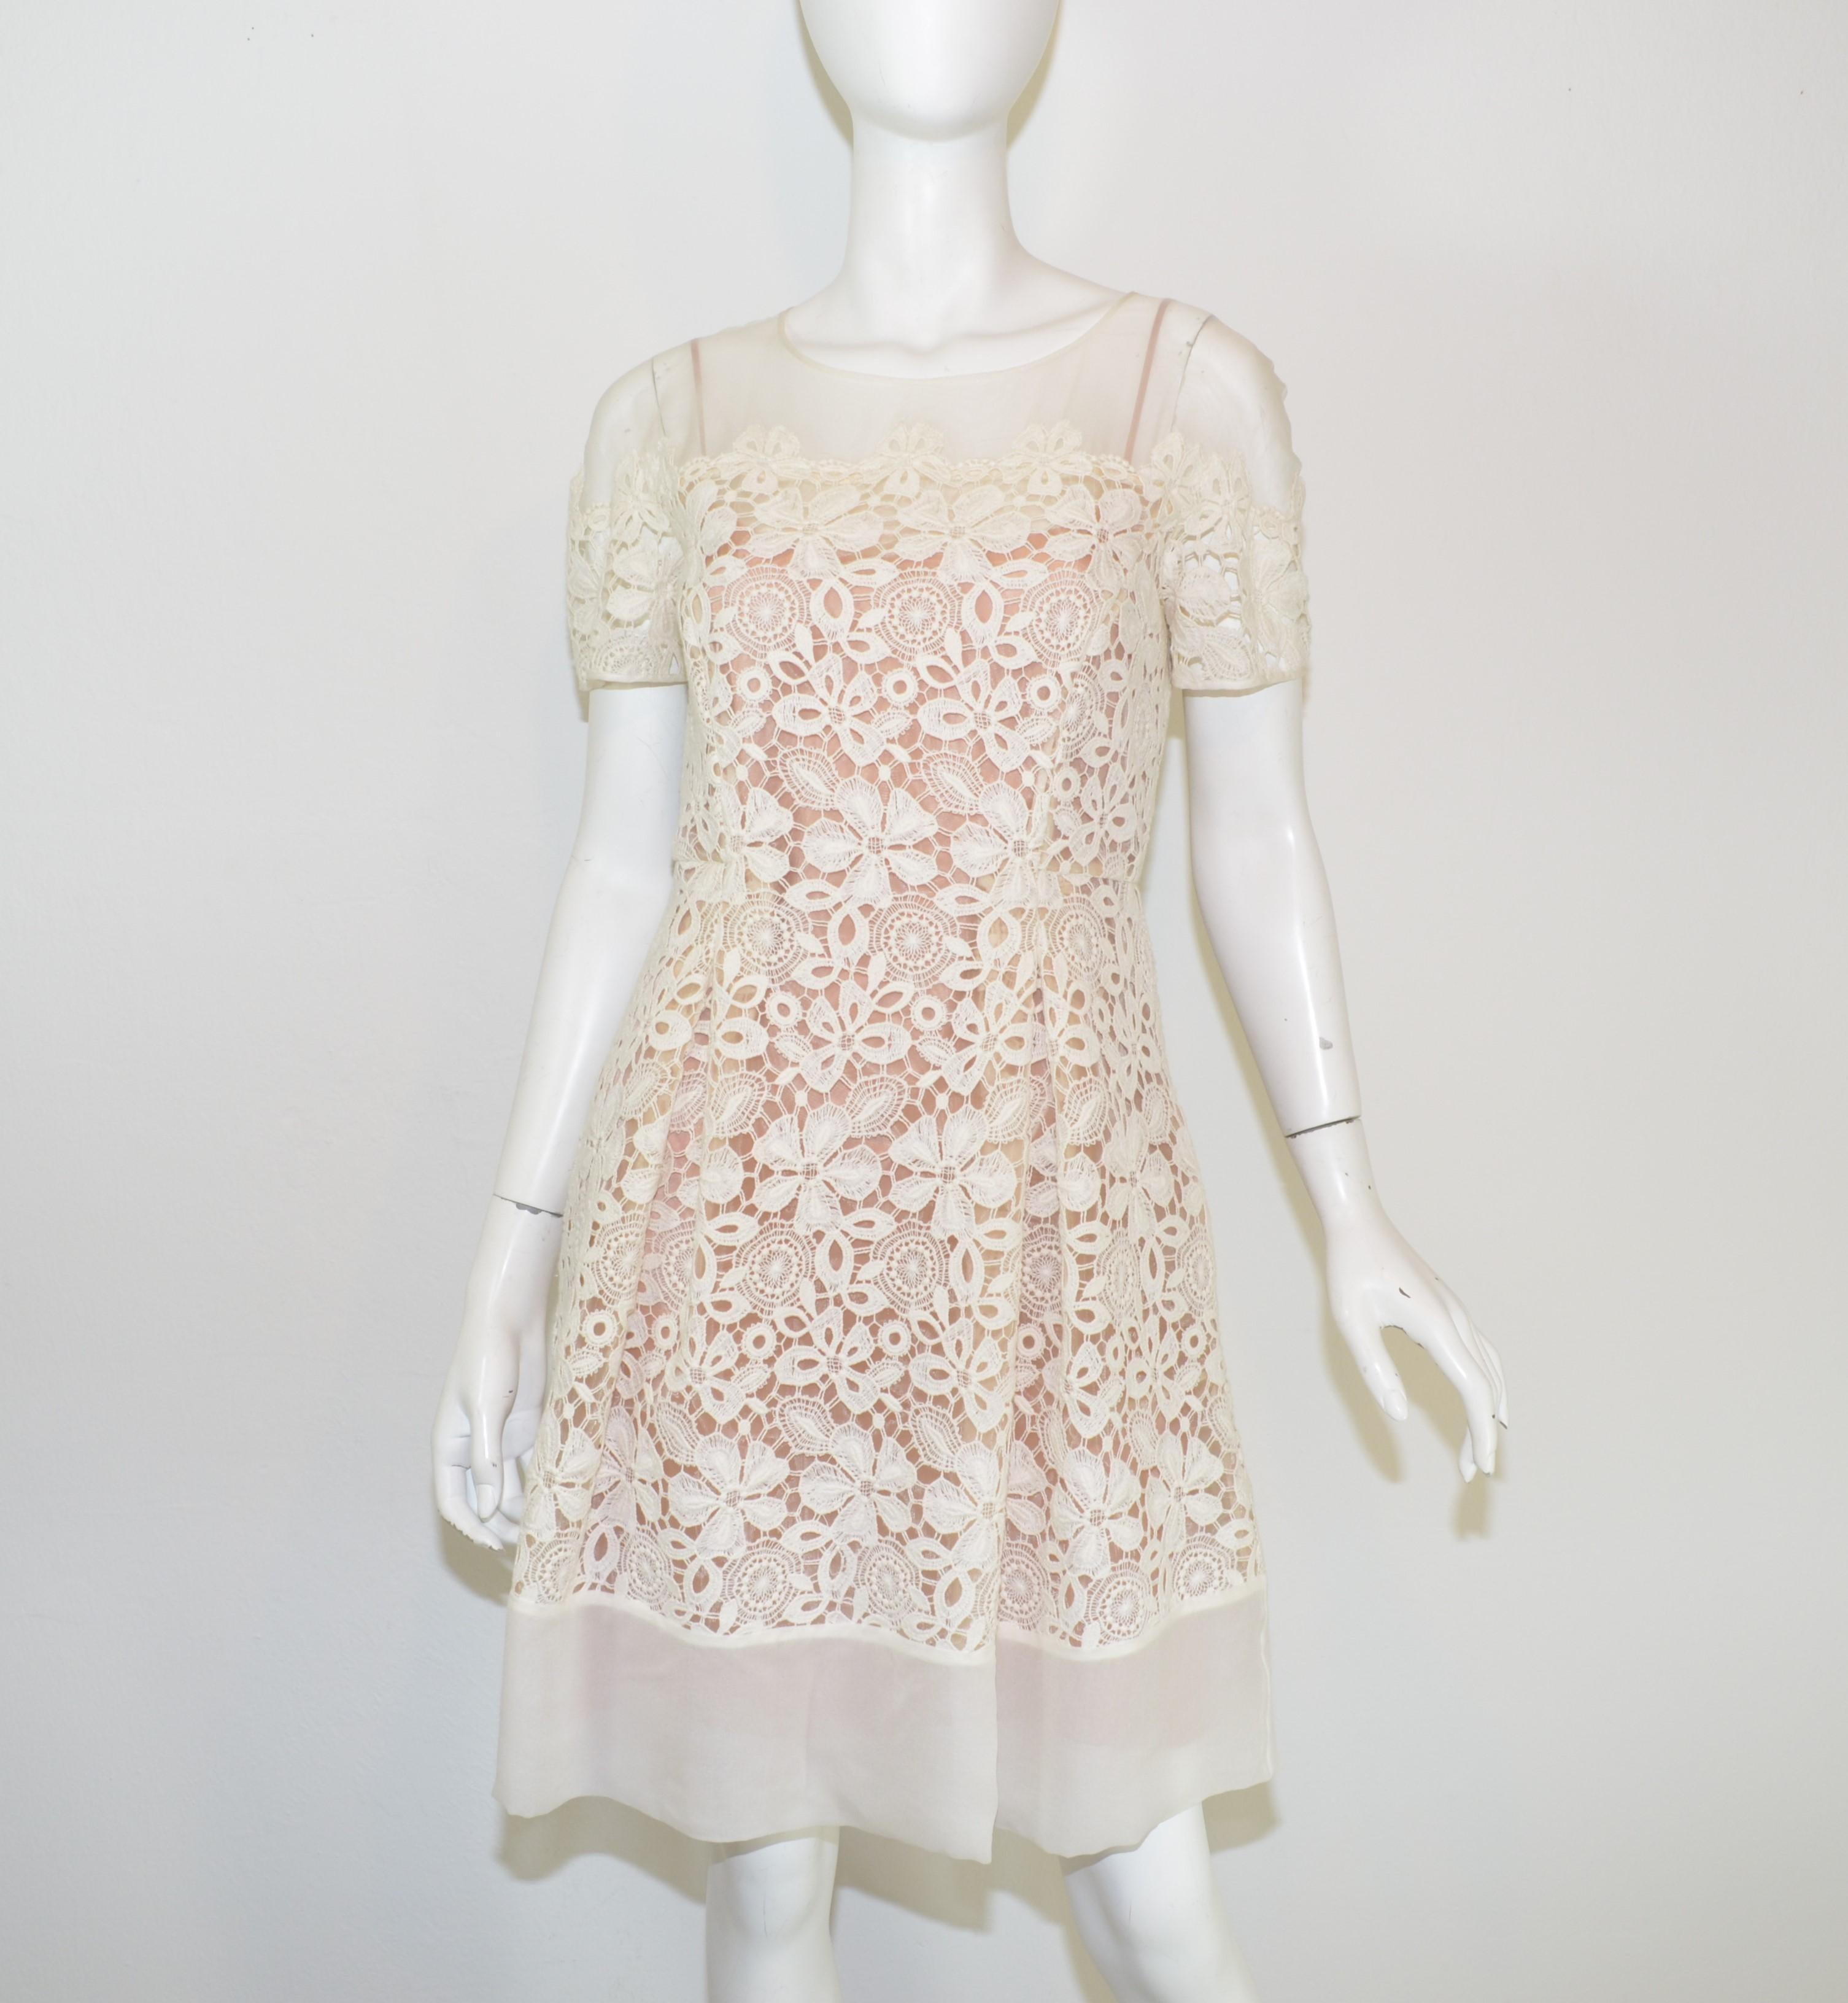 Alberta Ferretti Embroidered Organza A-Line Dress with Flower Motif -- This dress is featured in a cream/ivory embroidery on an organza fabric that has a nude underlayer. Dress has a back neck tie and zipper closure, pockets at the waist, and a full